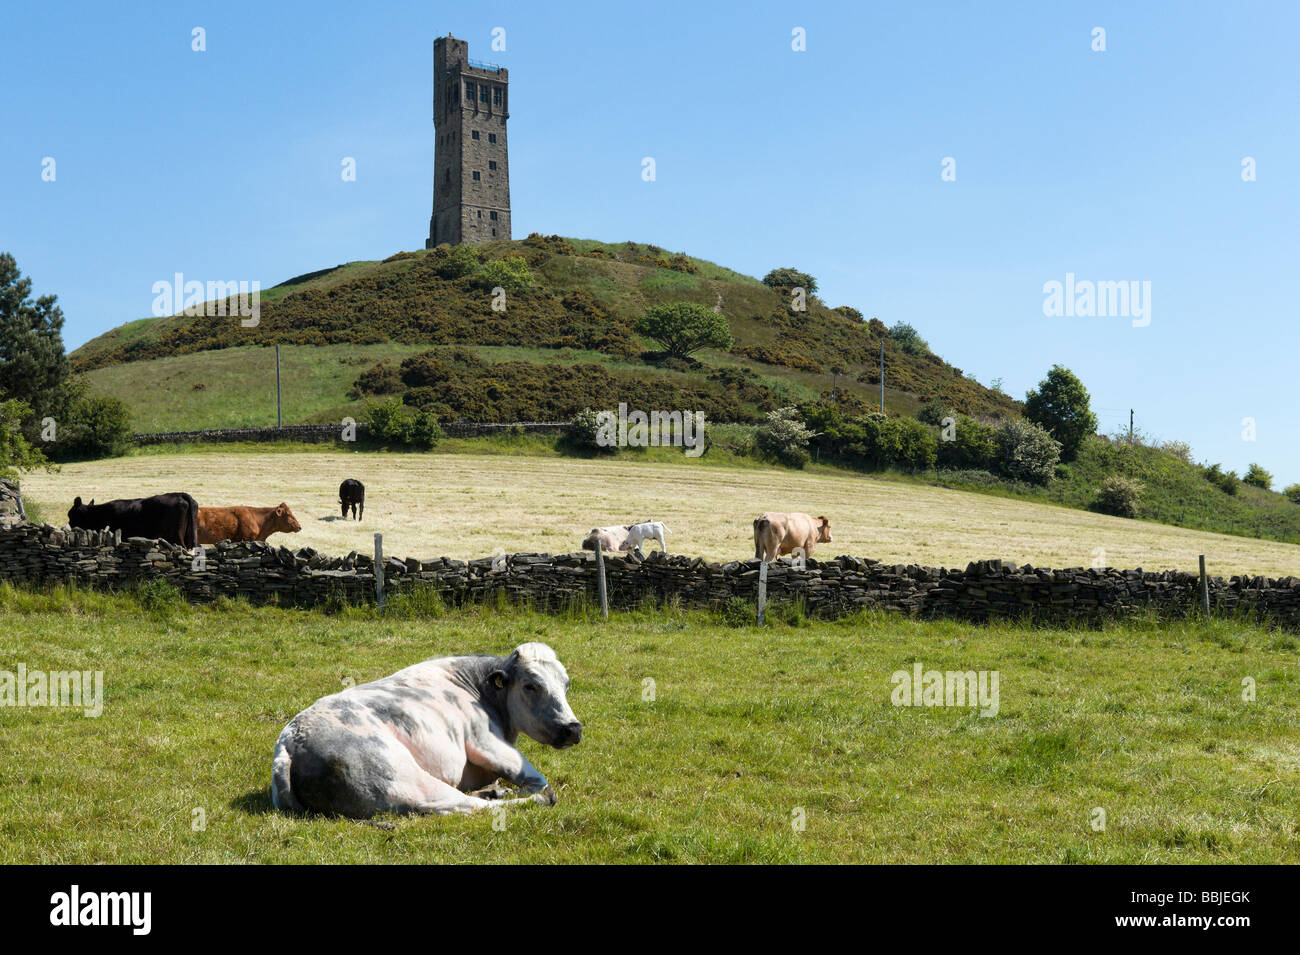 Cattle in front of Victoria Tower on Castle Hill, Huddersfield, West Yorkshire, England Stock Photo